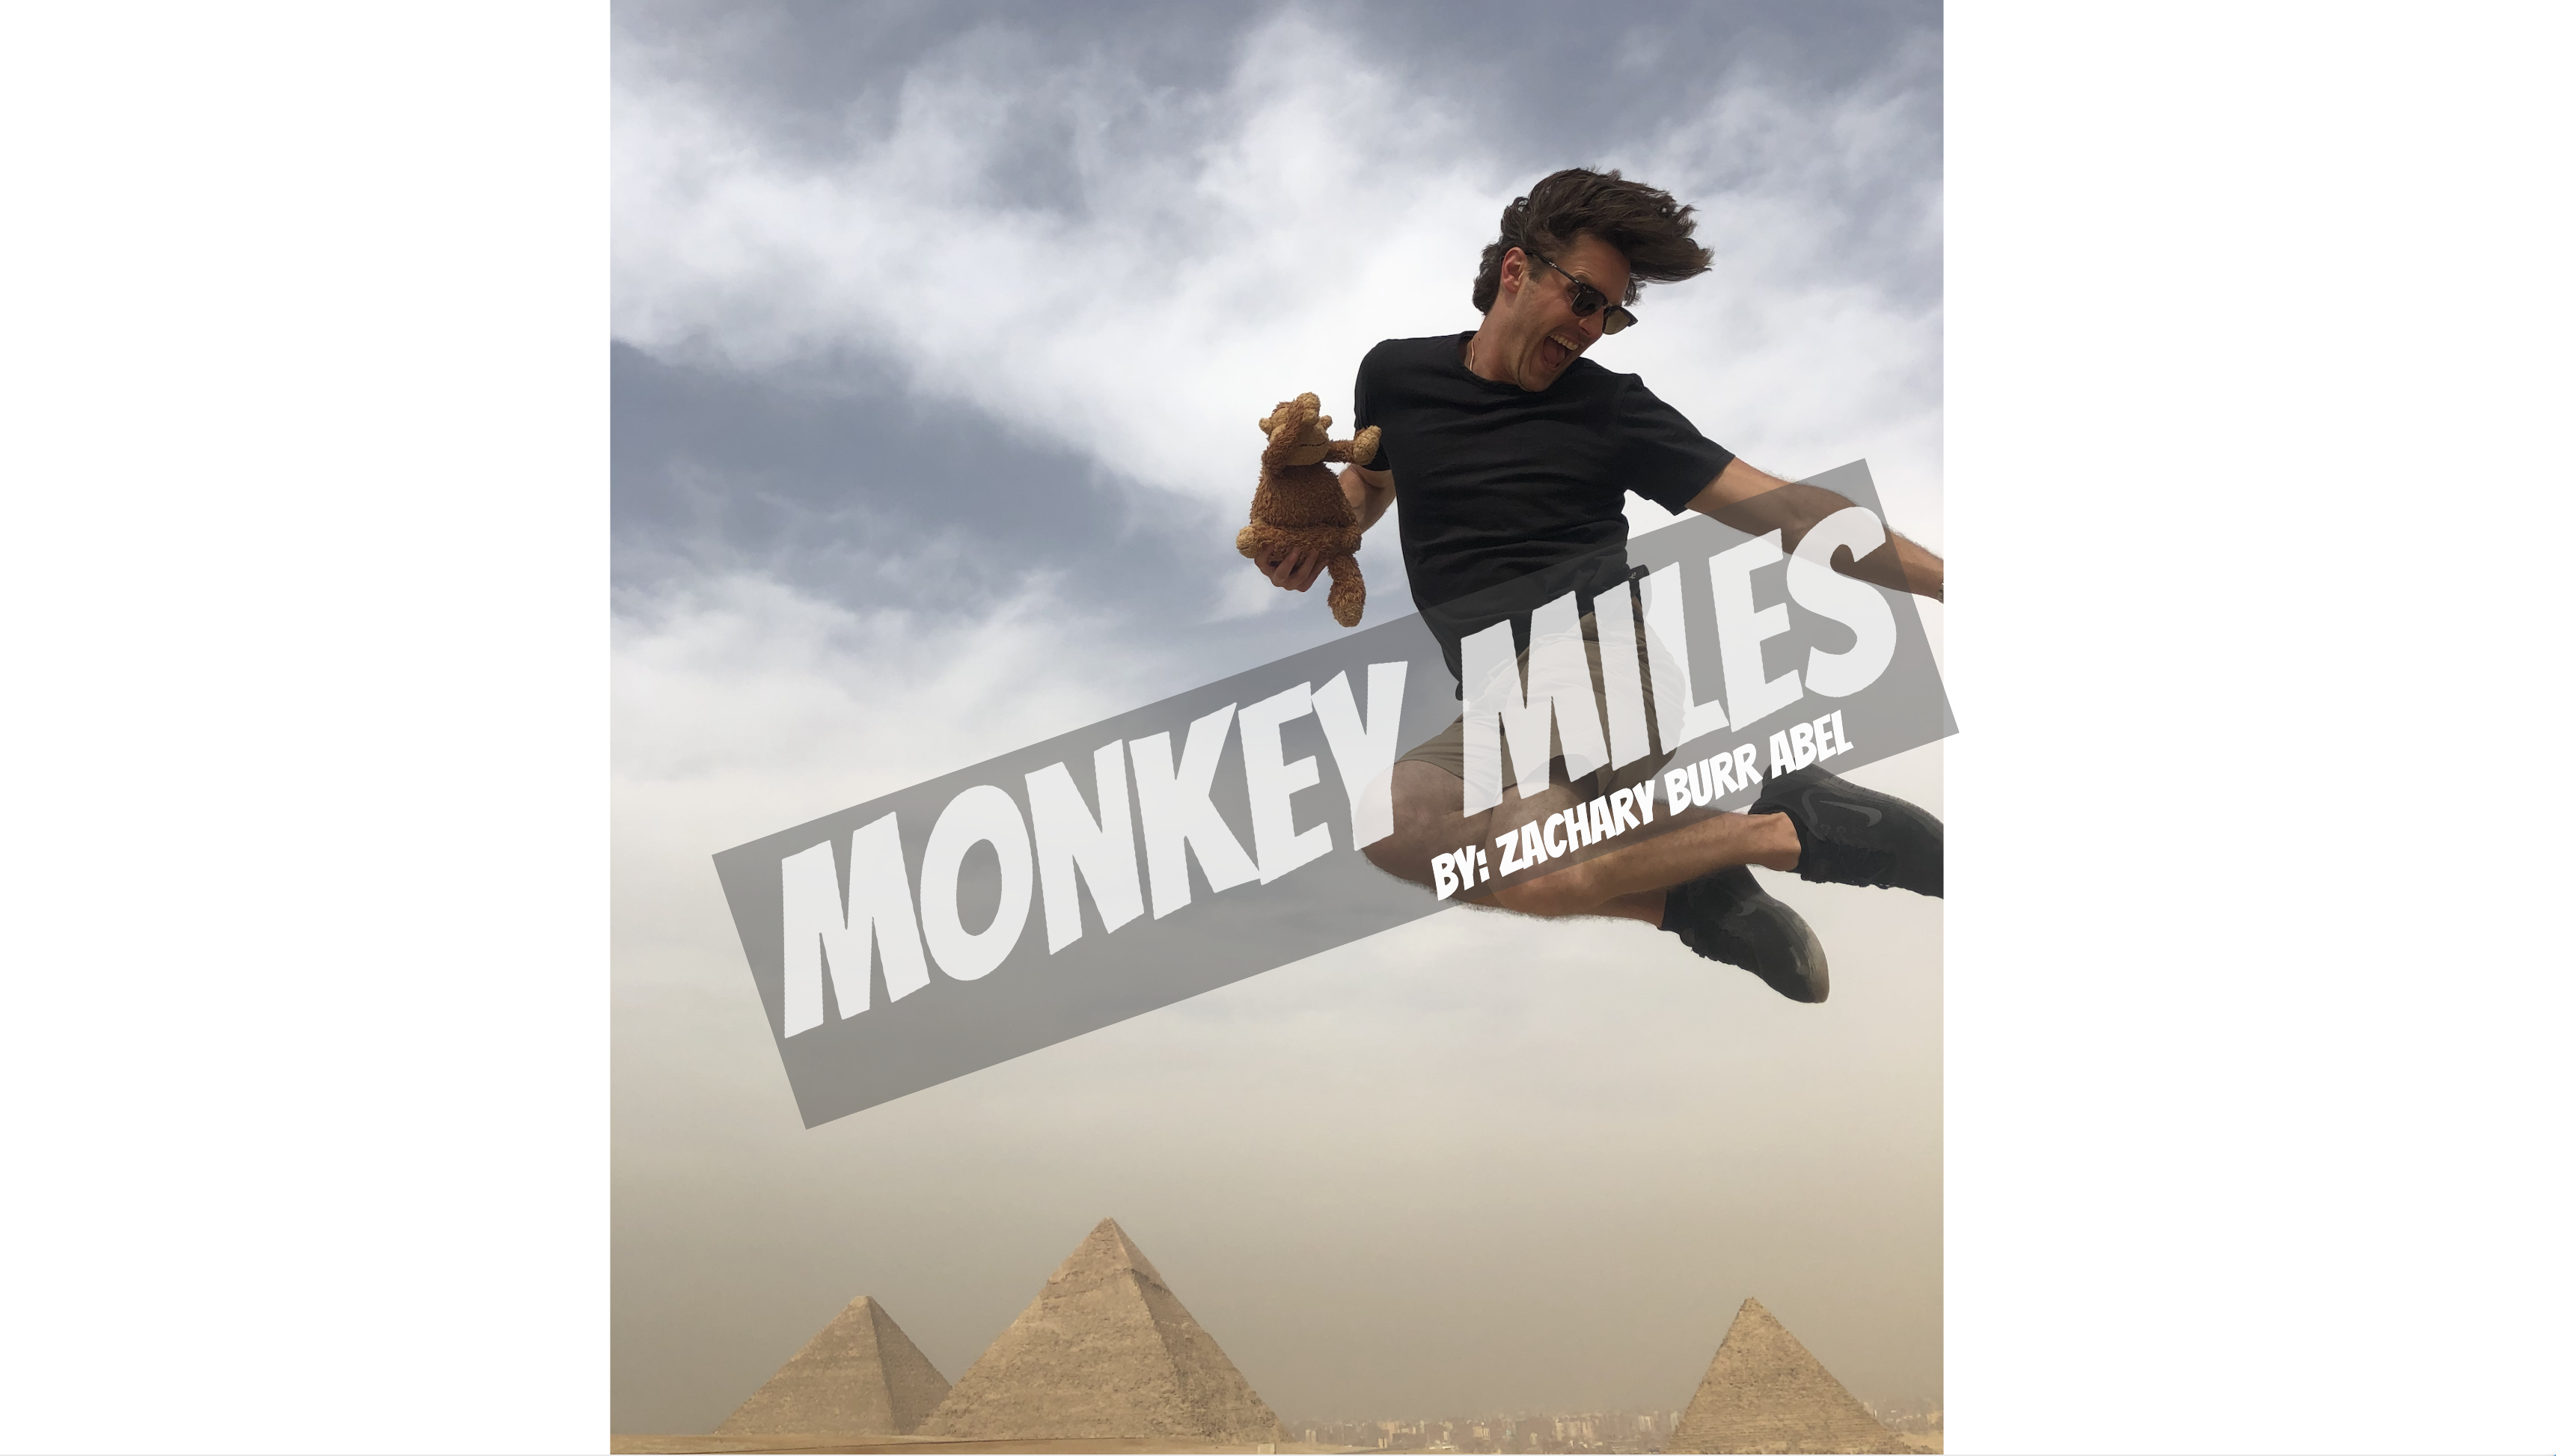 a man jumping in the air with a teddy bear and pyramids